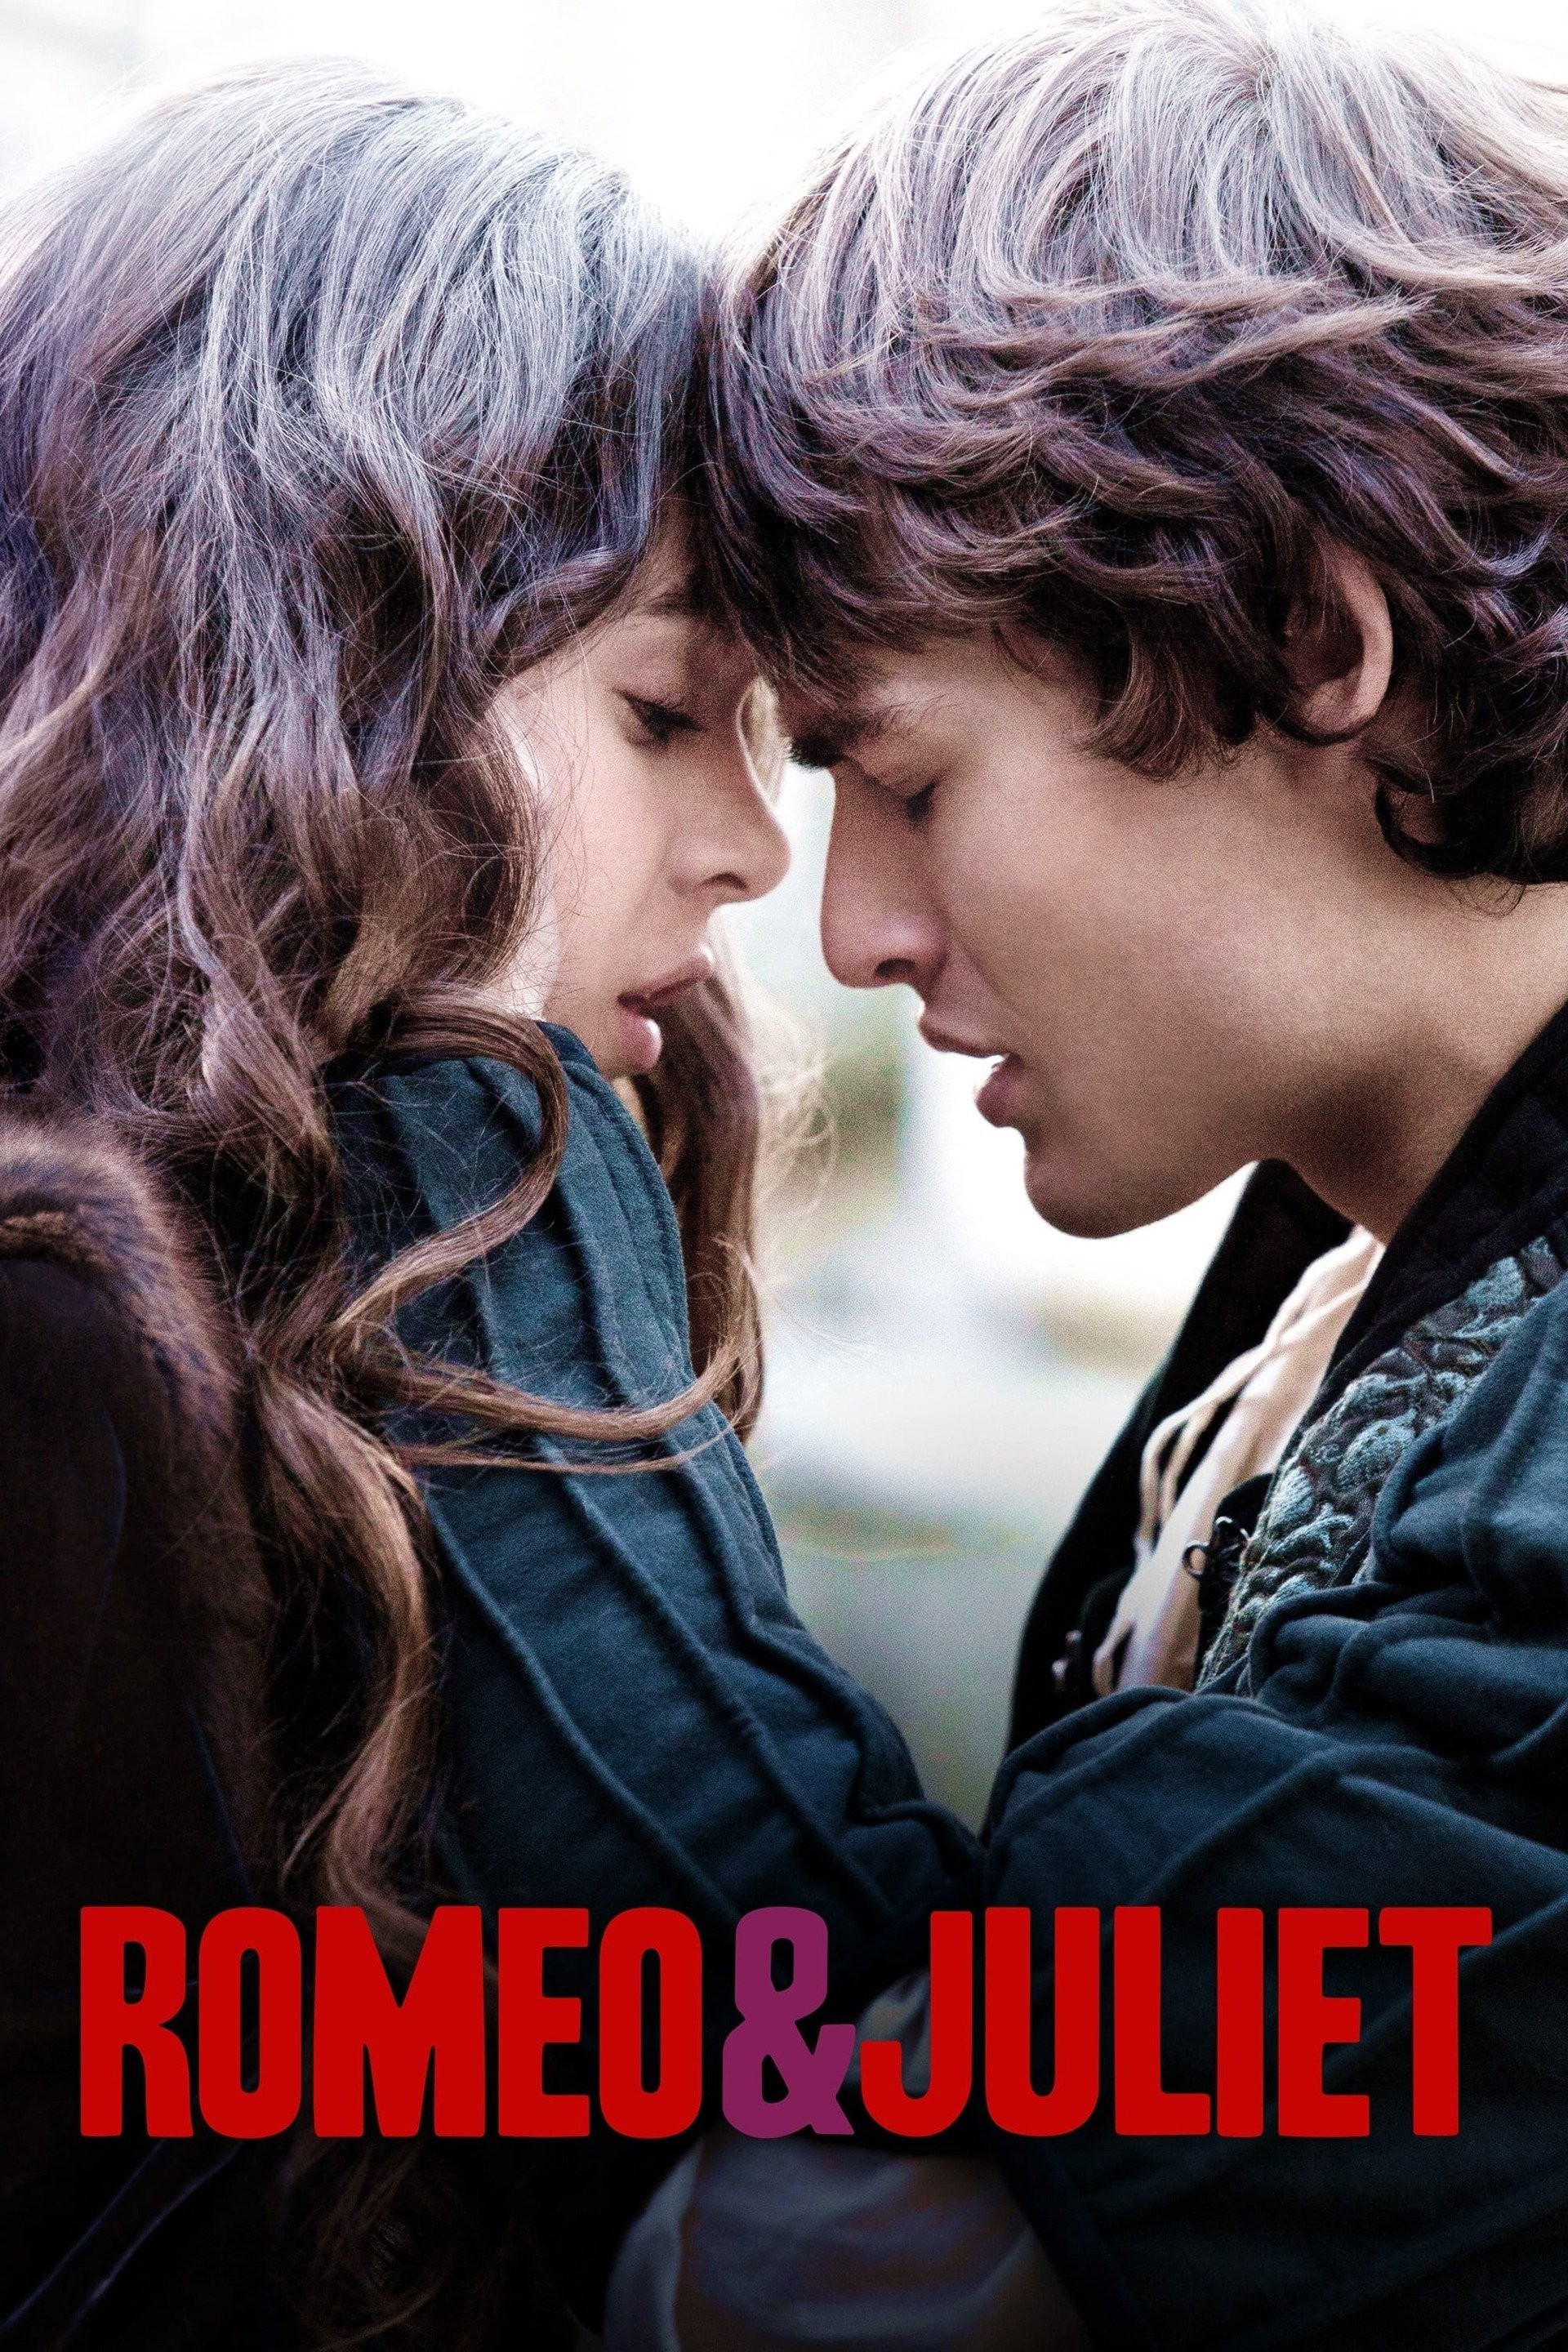 Romeo & Juliet' Review: Hailee Steinfeld, Douglas Booth Star in  Disappointing Shakespeare Adaptation